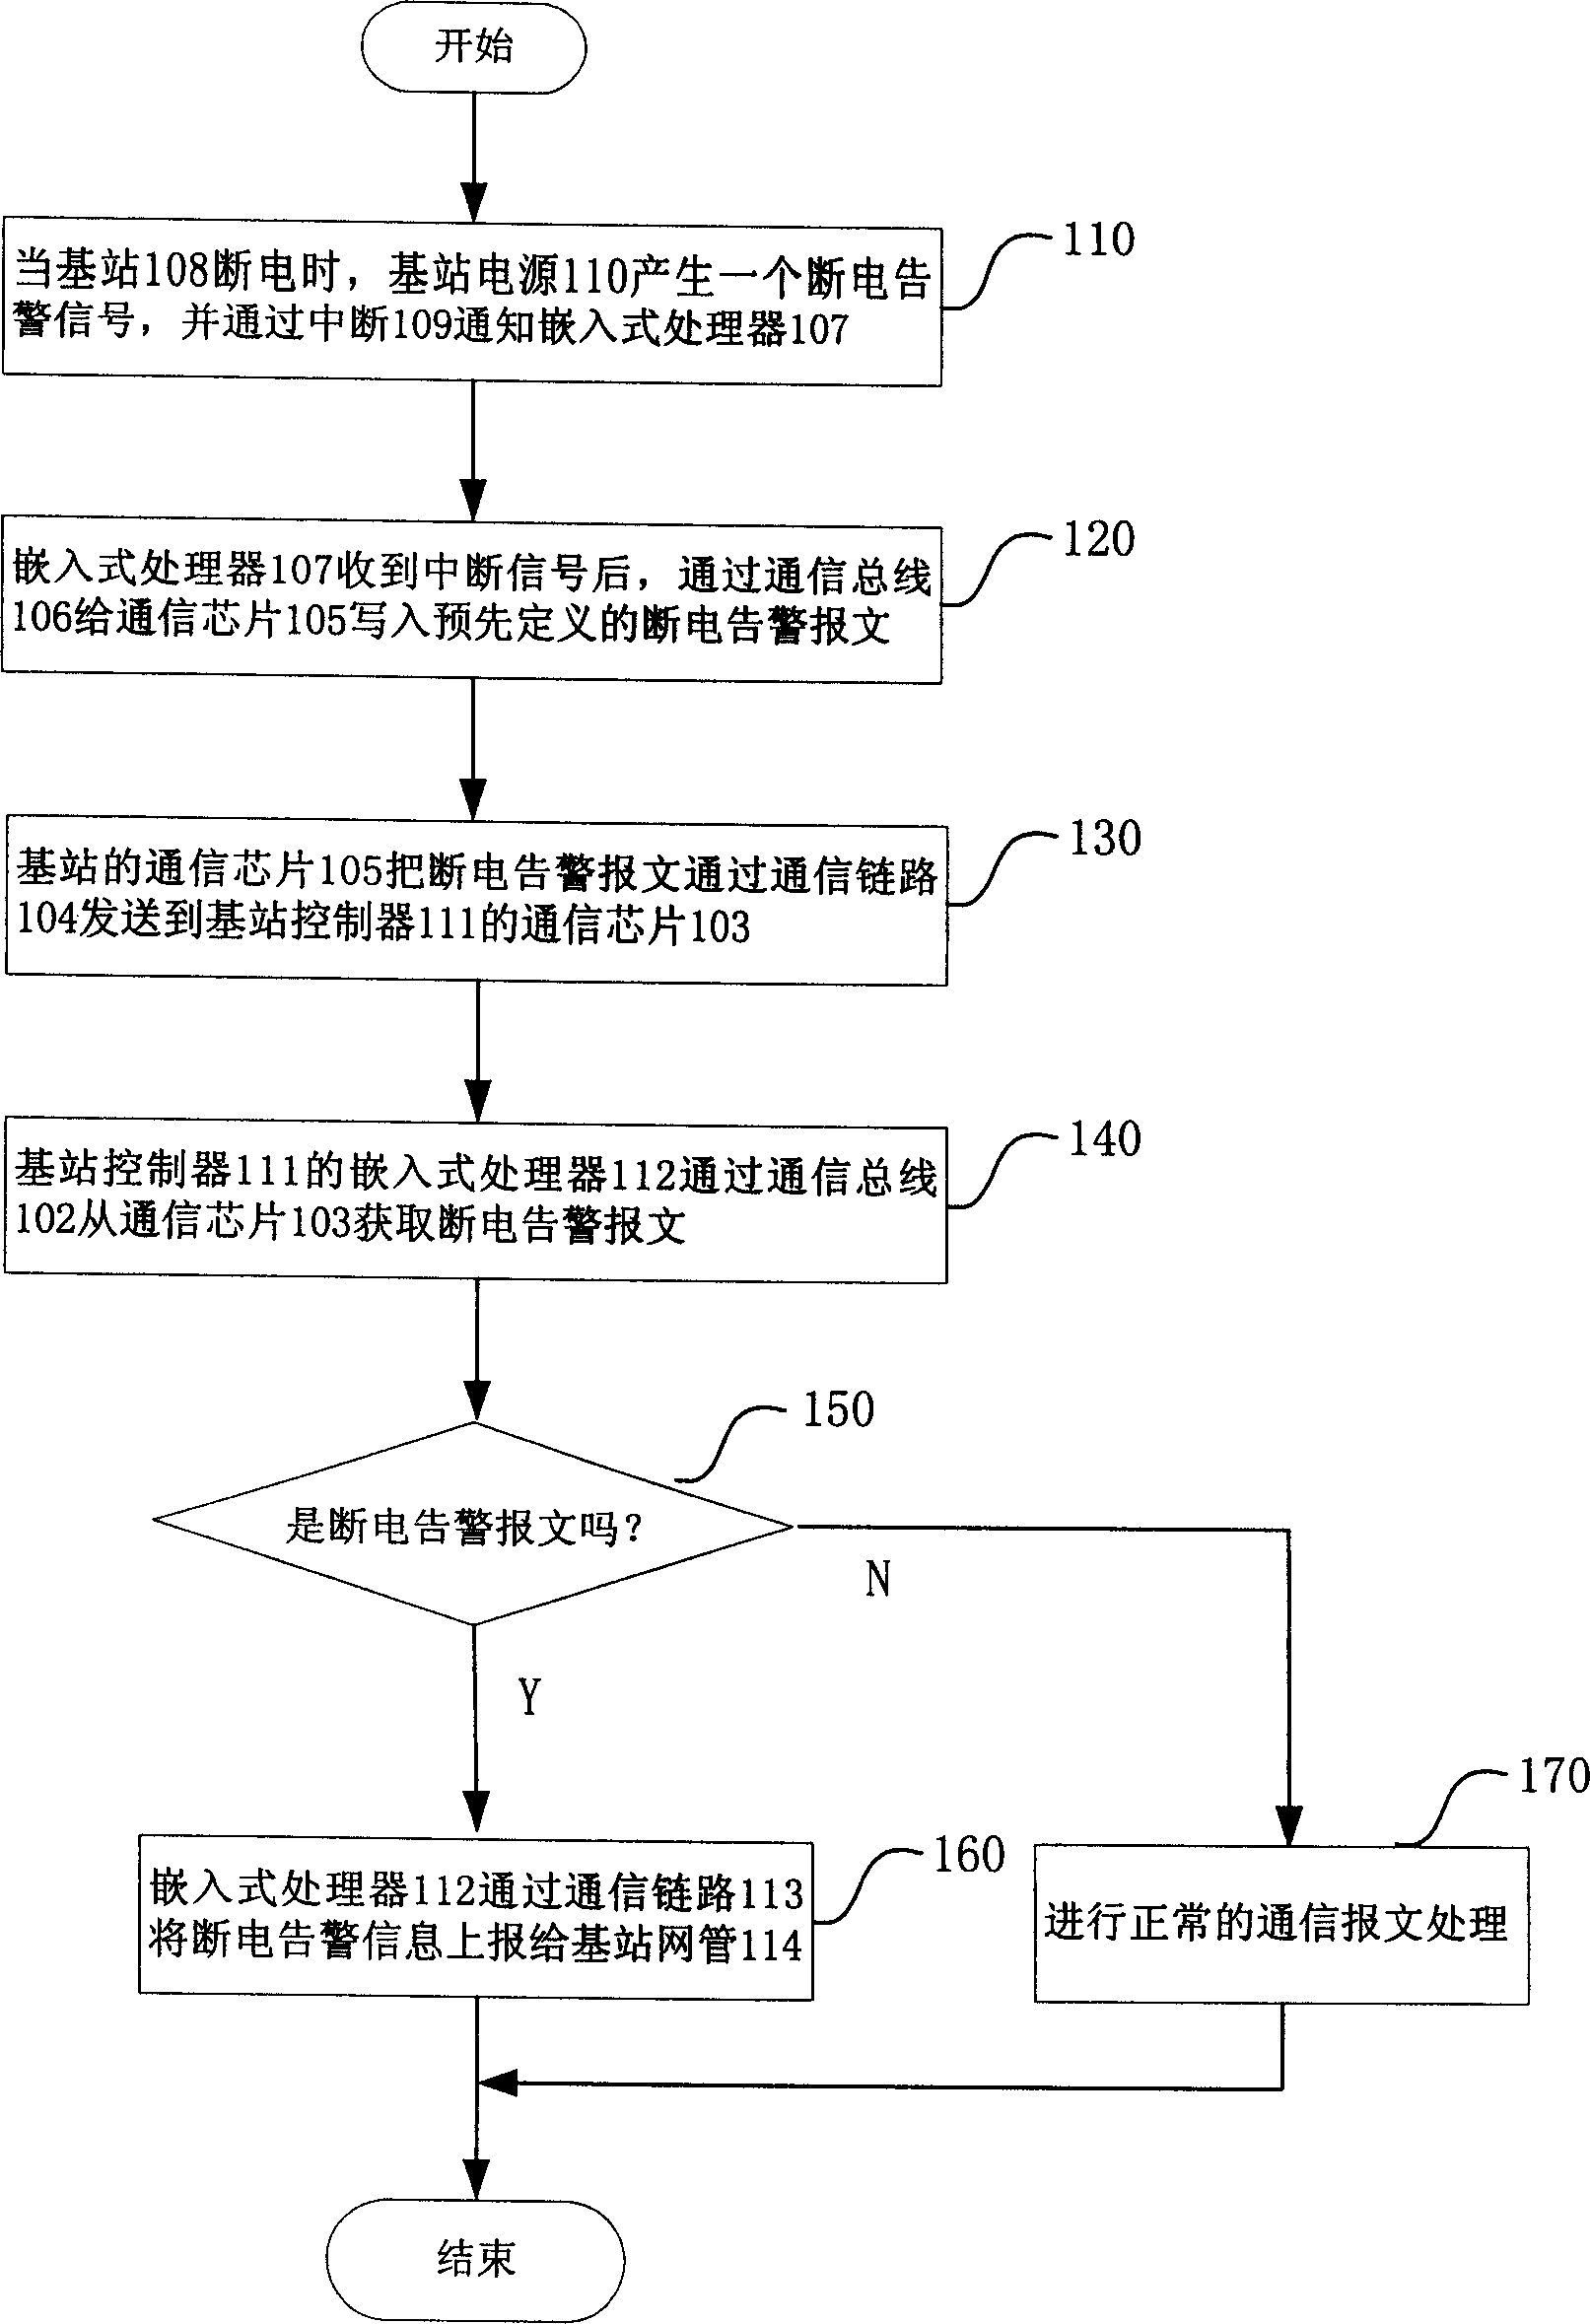 Method of implementing alarm for power-off of base station